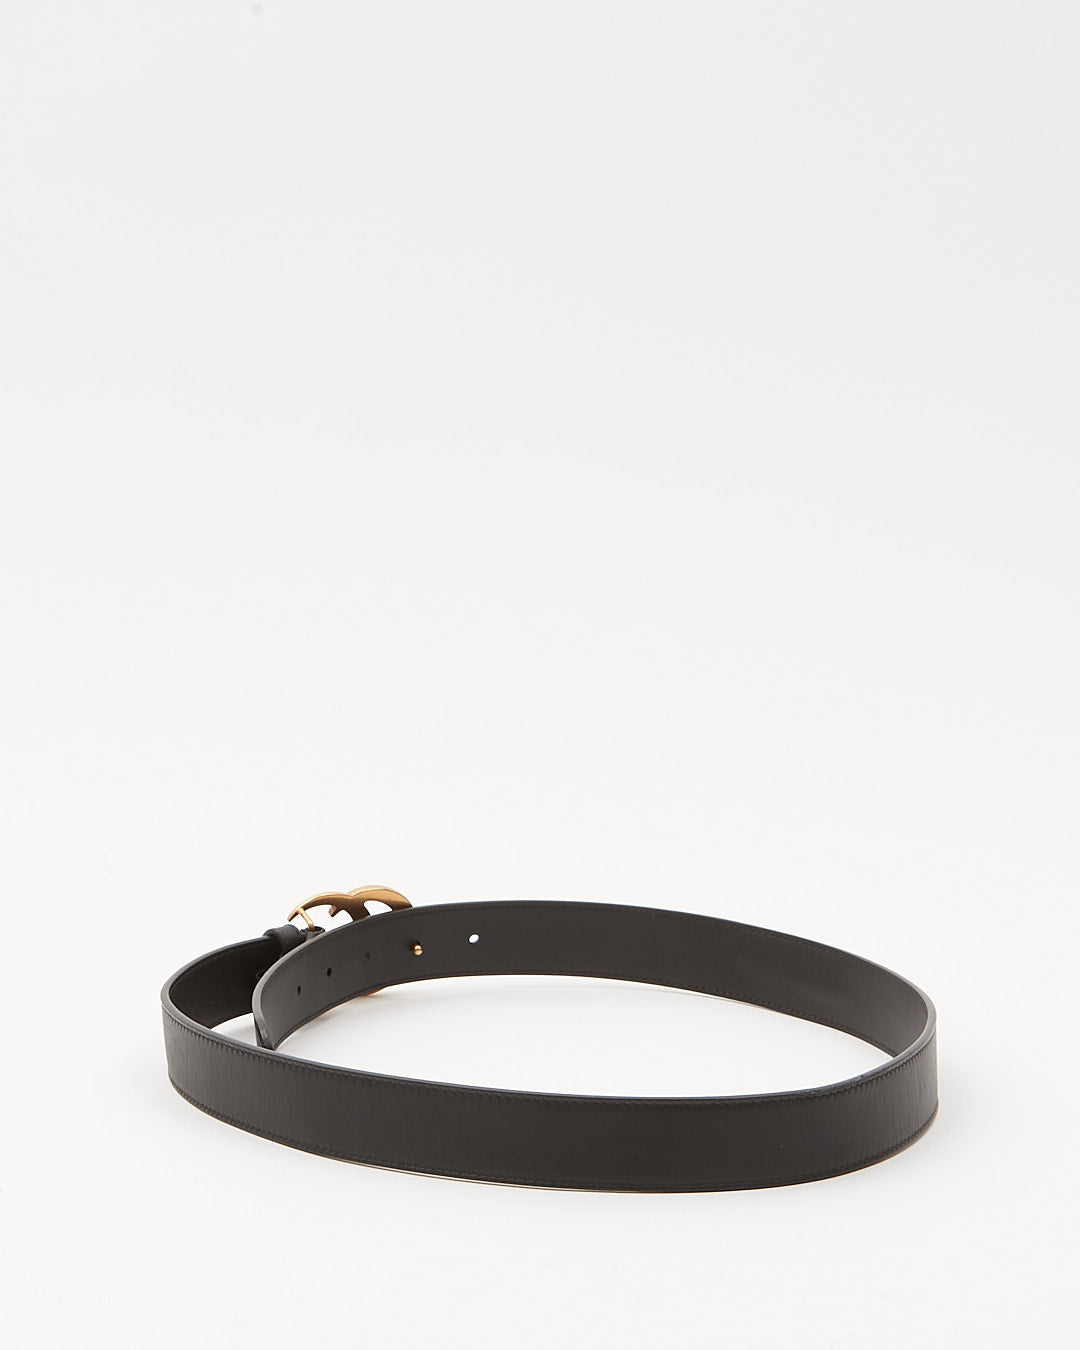 Gucci GG Marmont Thin Leather Belt - 85/34